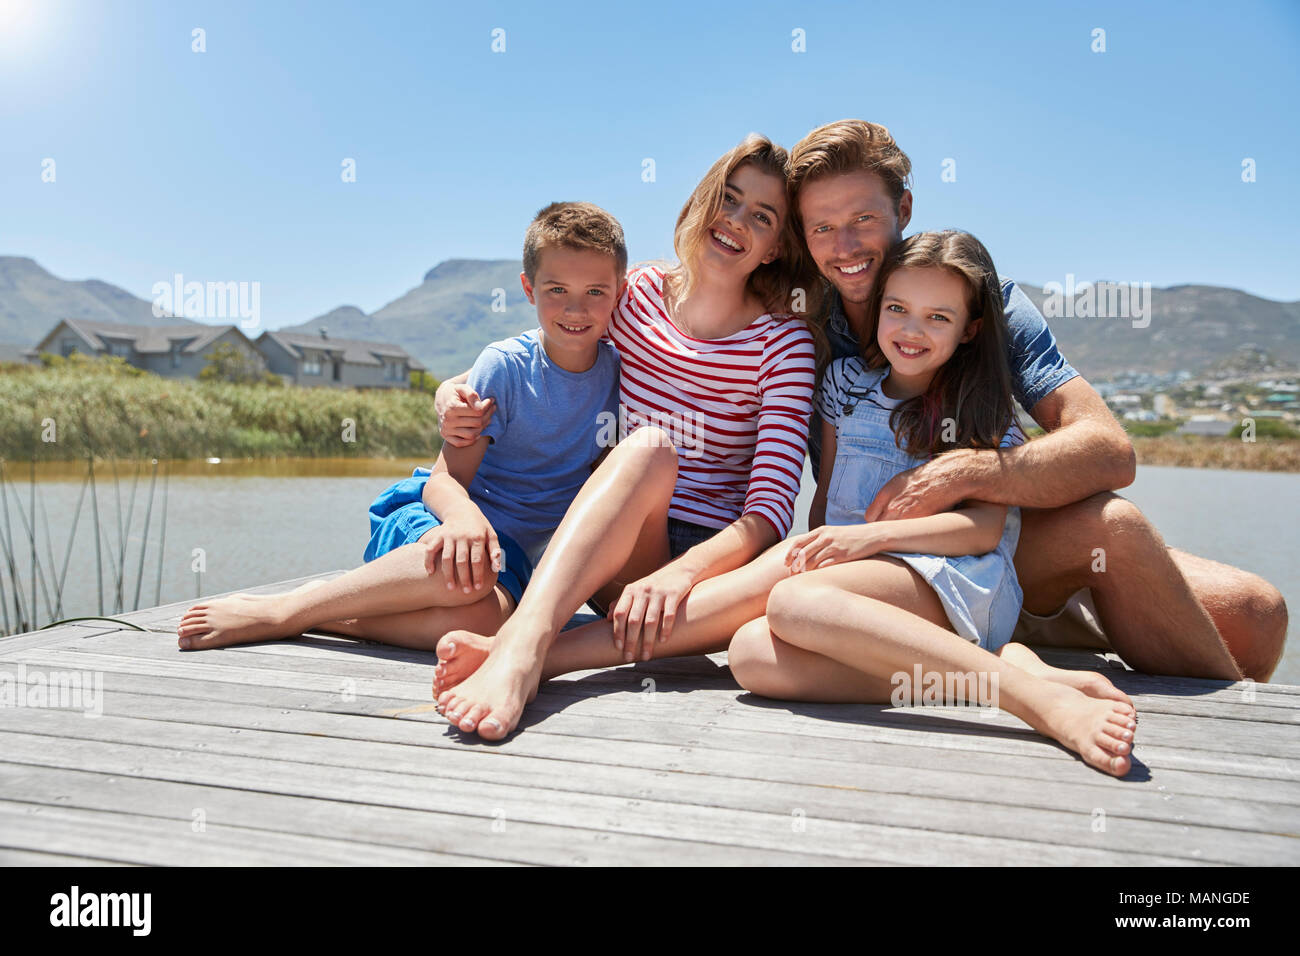 Portrait Of Smiling Family Sitting on Wooden Jetty By Lake Banque D'Images